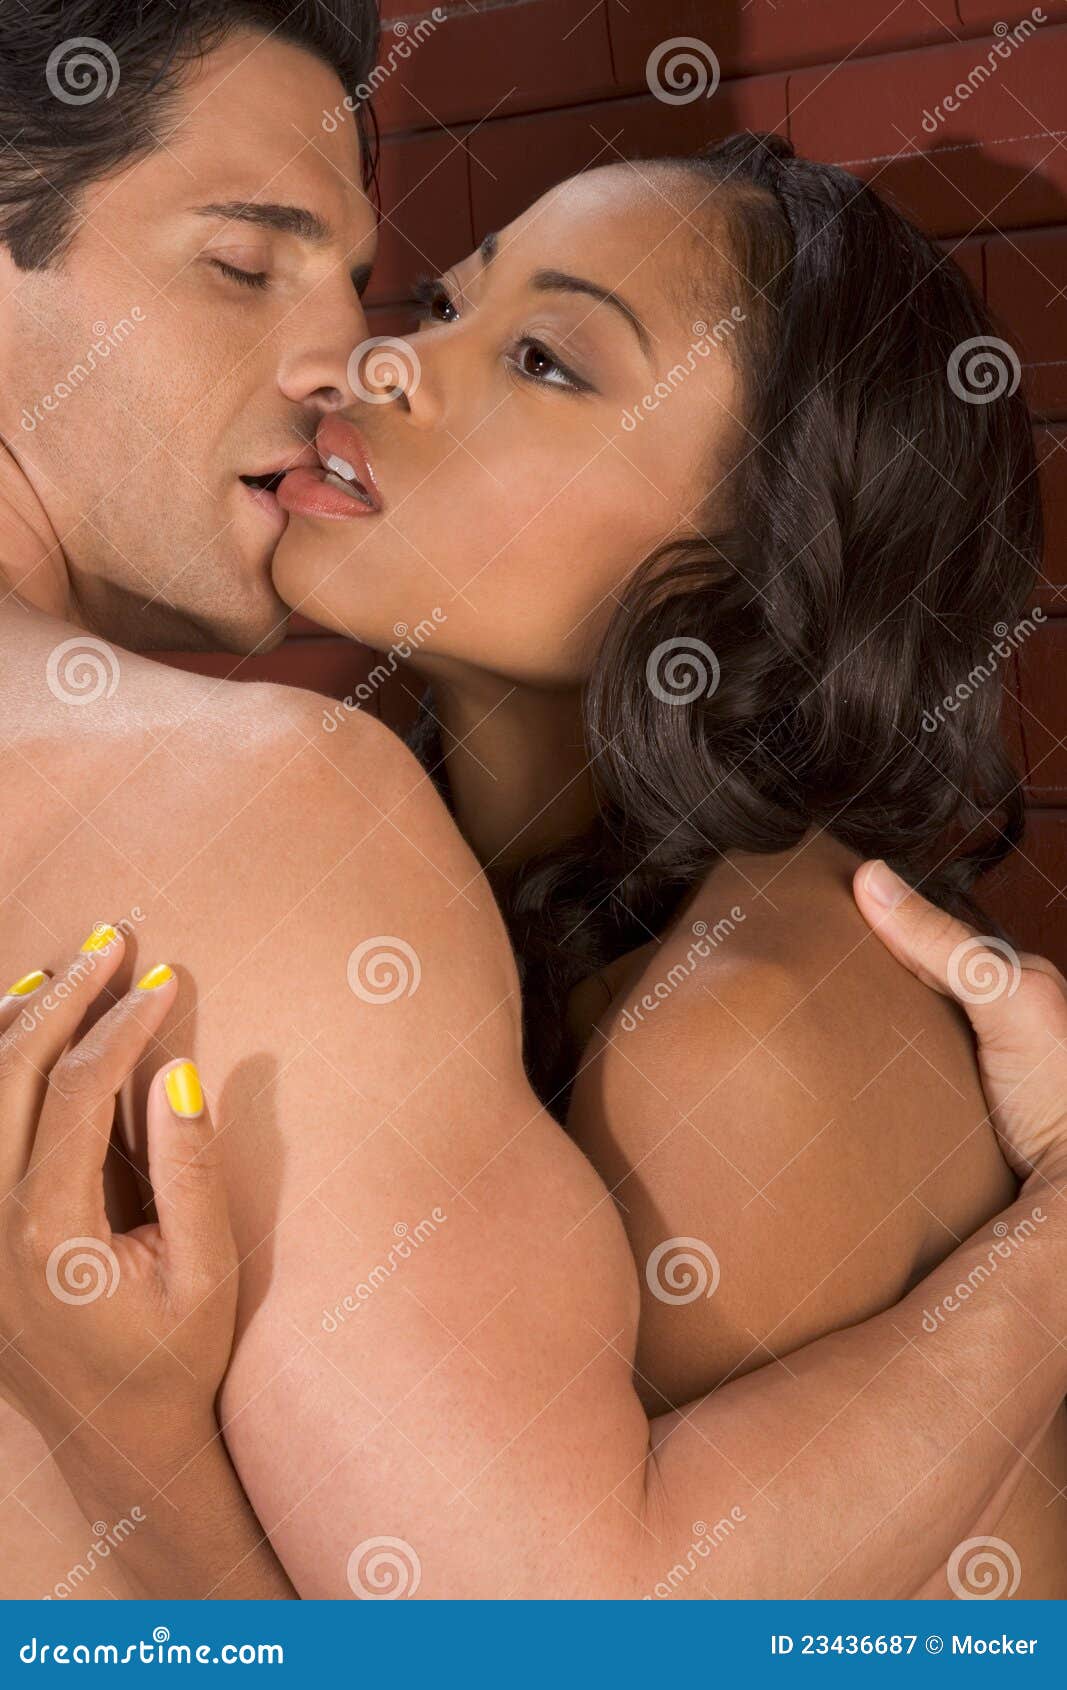 Young Couple Naked Man and Woman in Love Kissing Stock Image picture